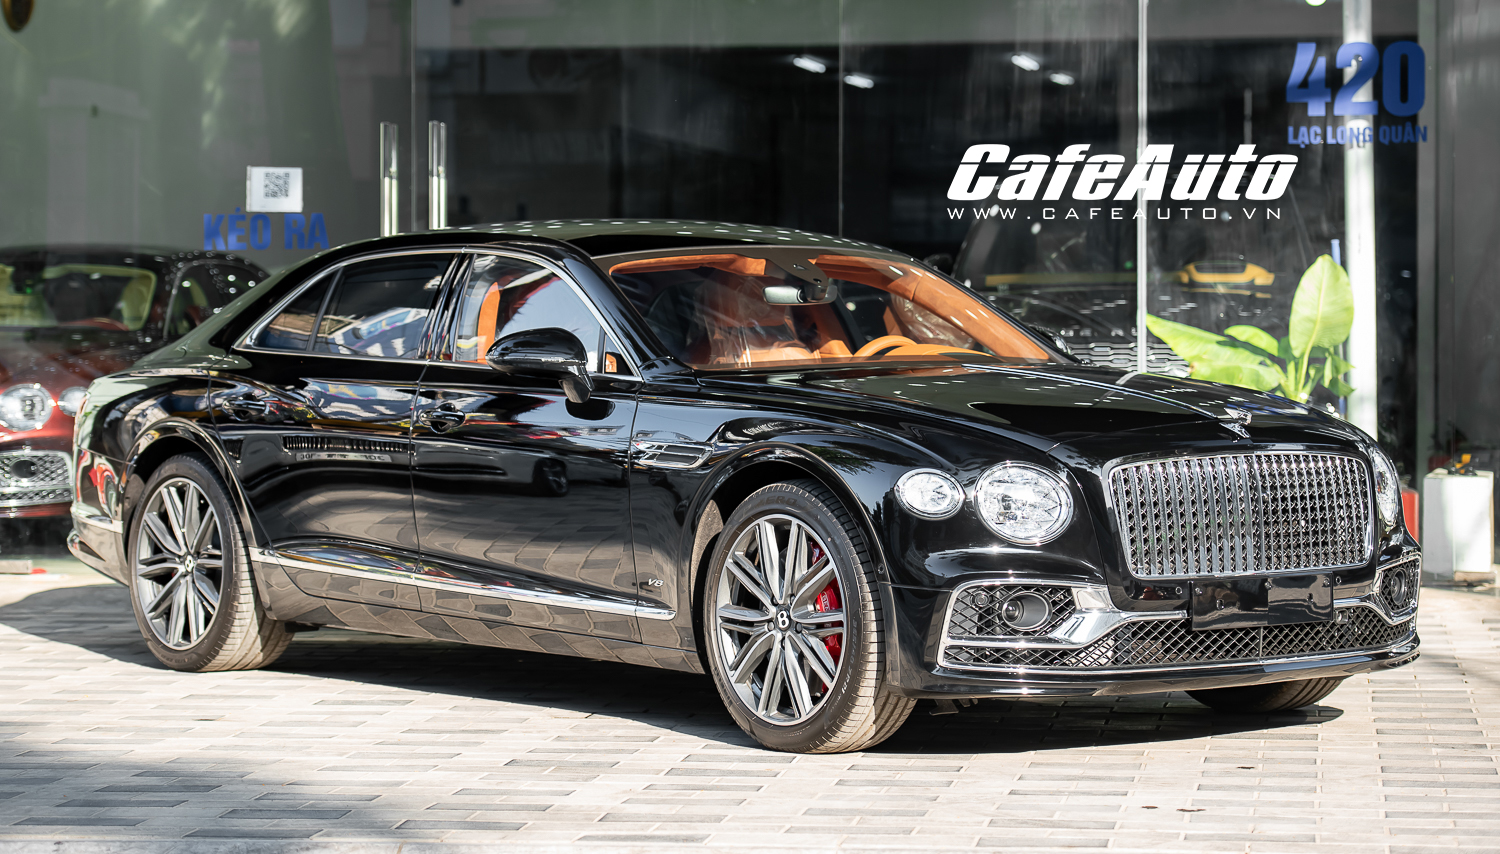 doan-di-bang-mua-bentley-flying-spur-20-ty-cafeautovn-2